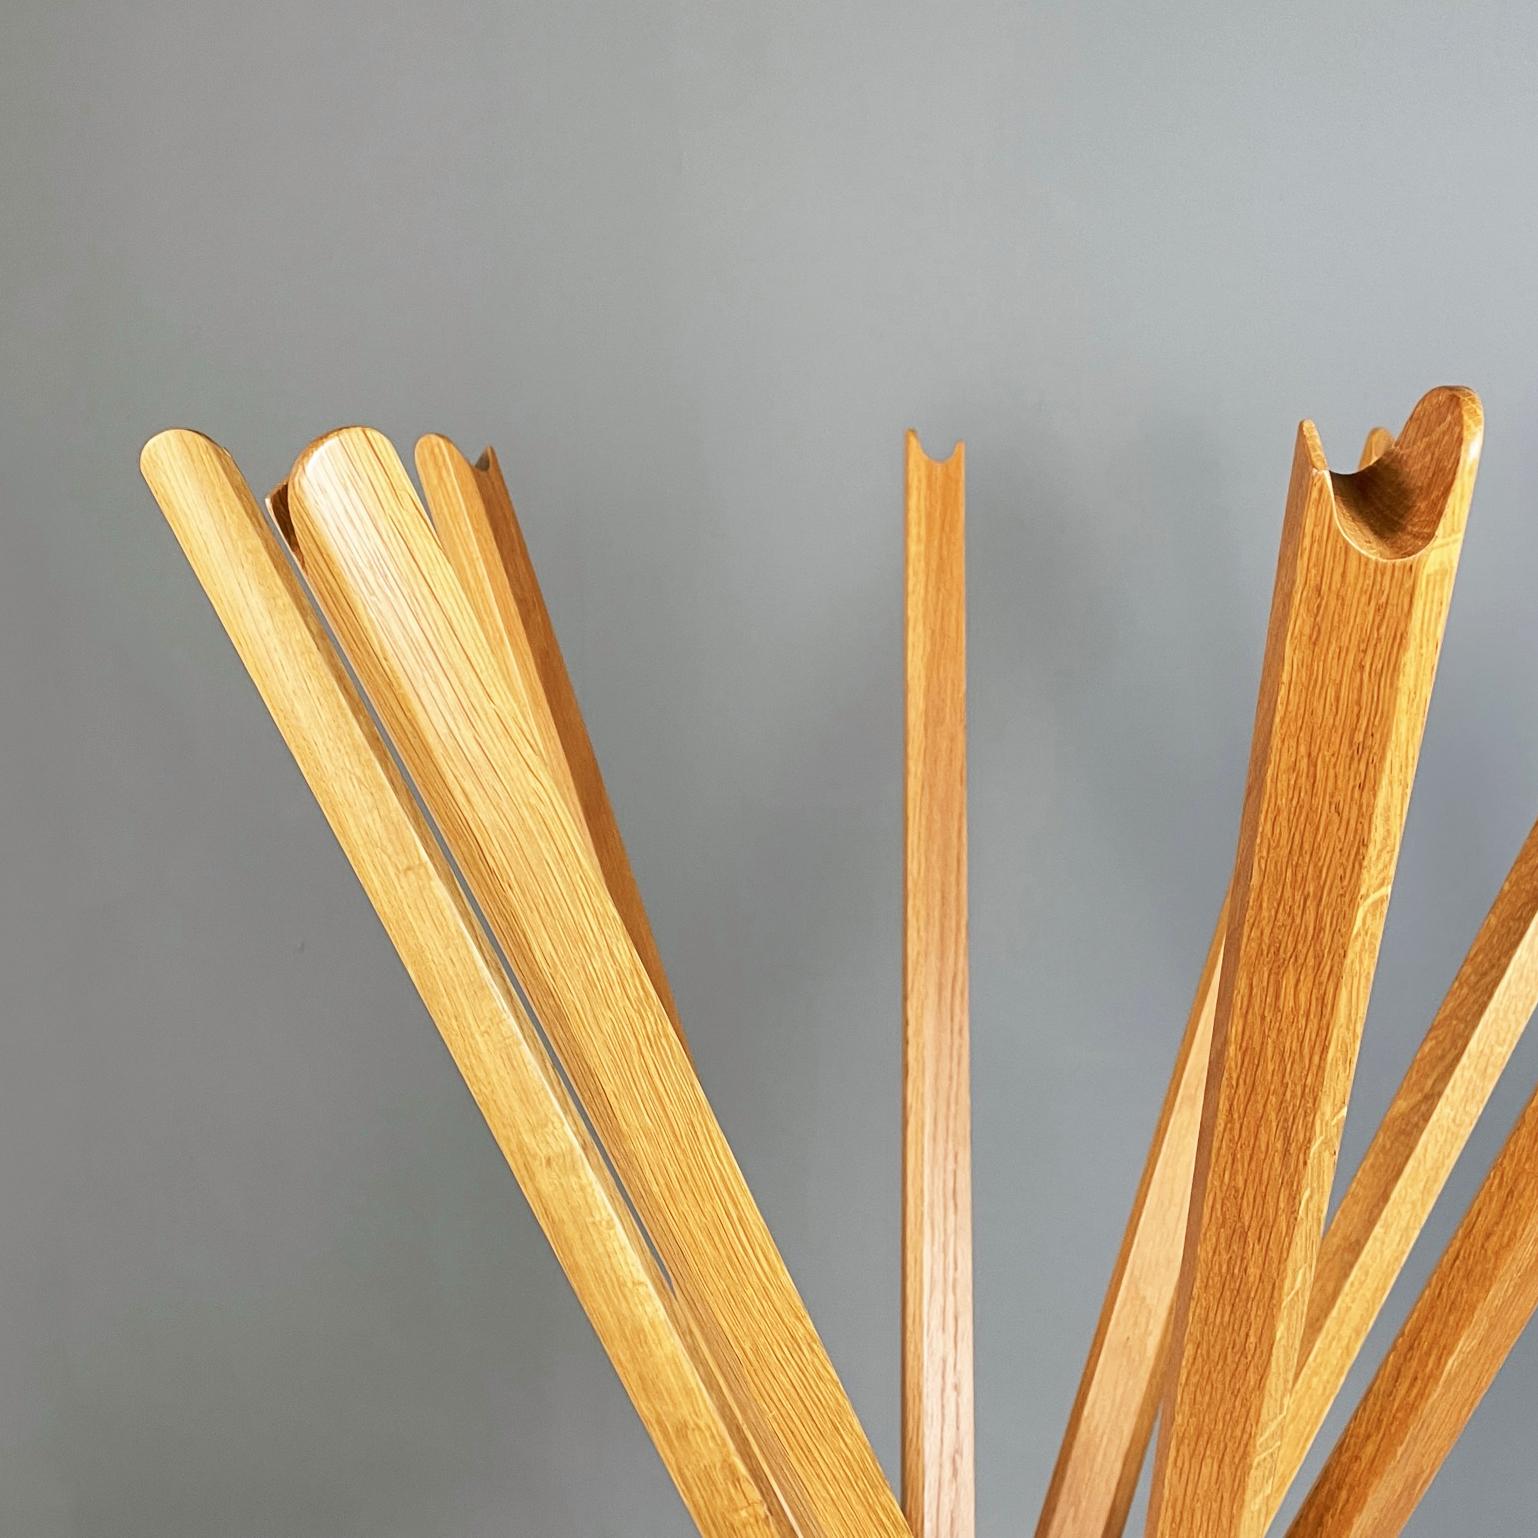 Italian modern Wood coat hanger mod. Sciangai by De Pas, D'Urbino and Lomazzi for Zanotta, 1980s
Coat hanger mod. Sciangai in wood. The coat hanger is made up of a series of wooden rods that join in the center and widen at the ends. Fully